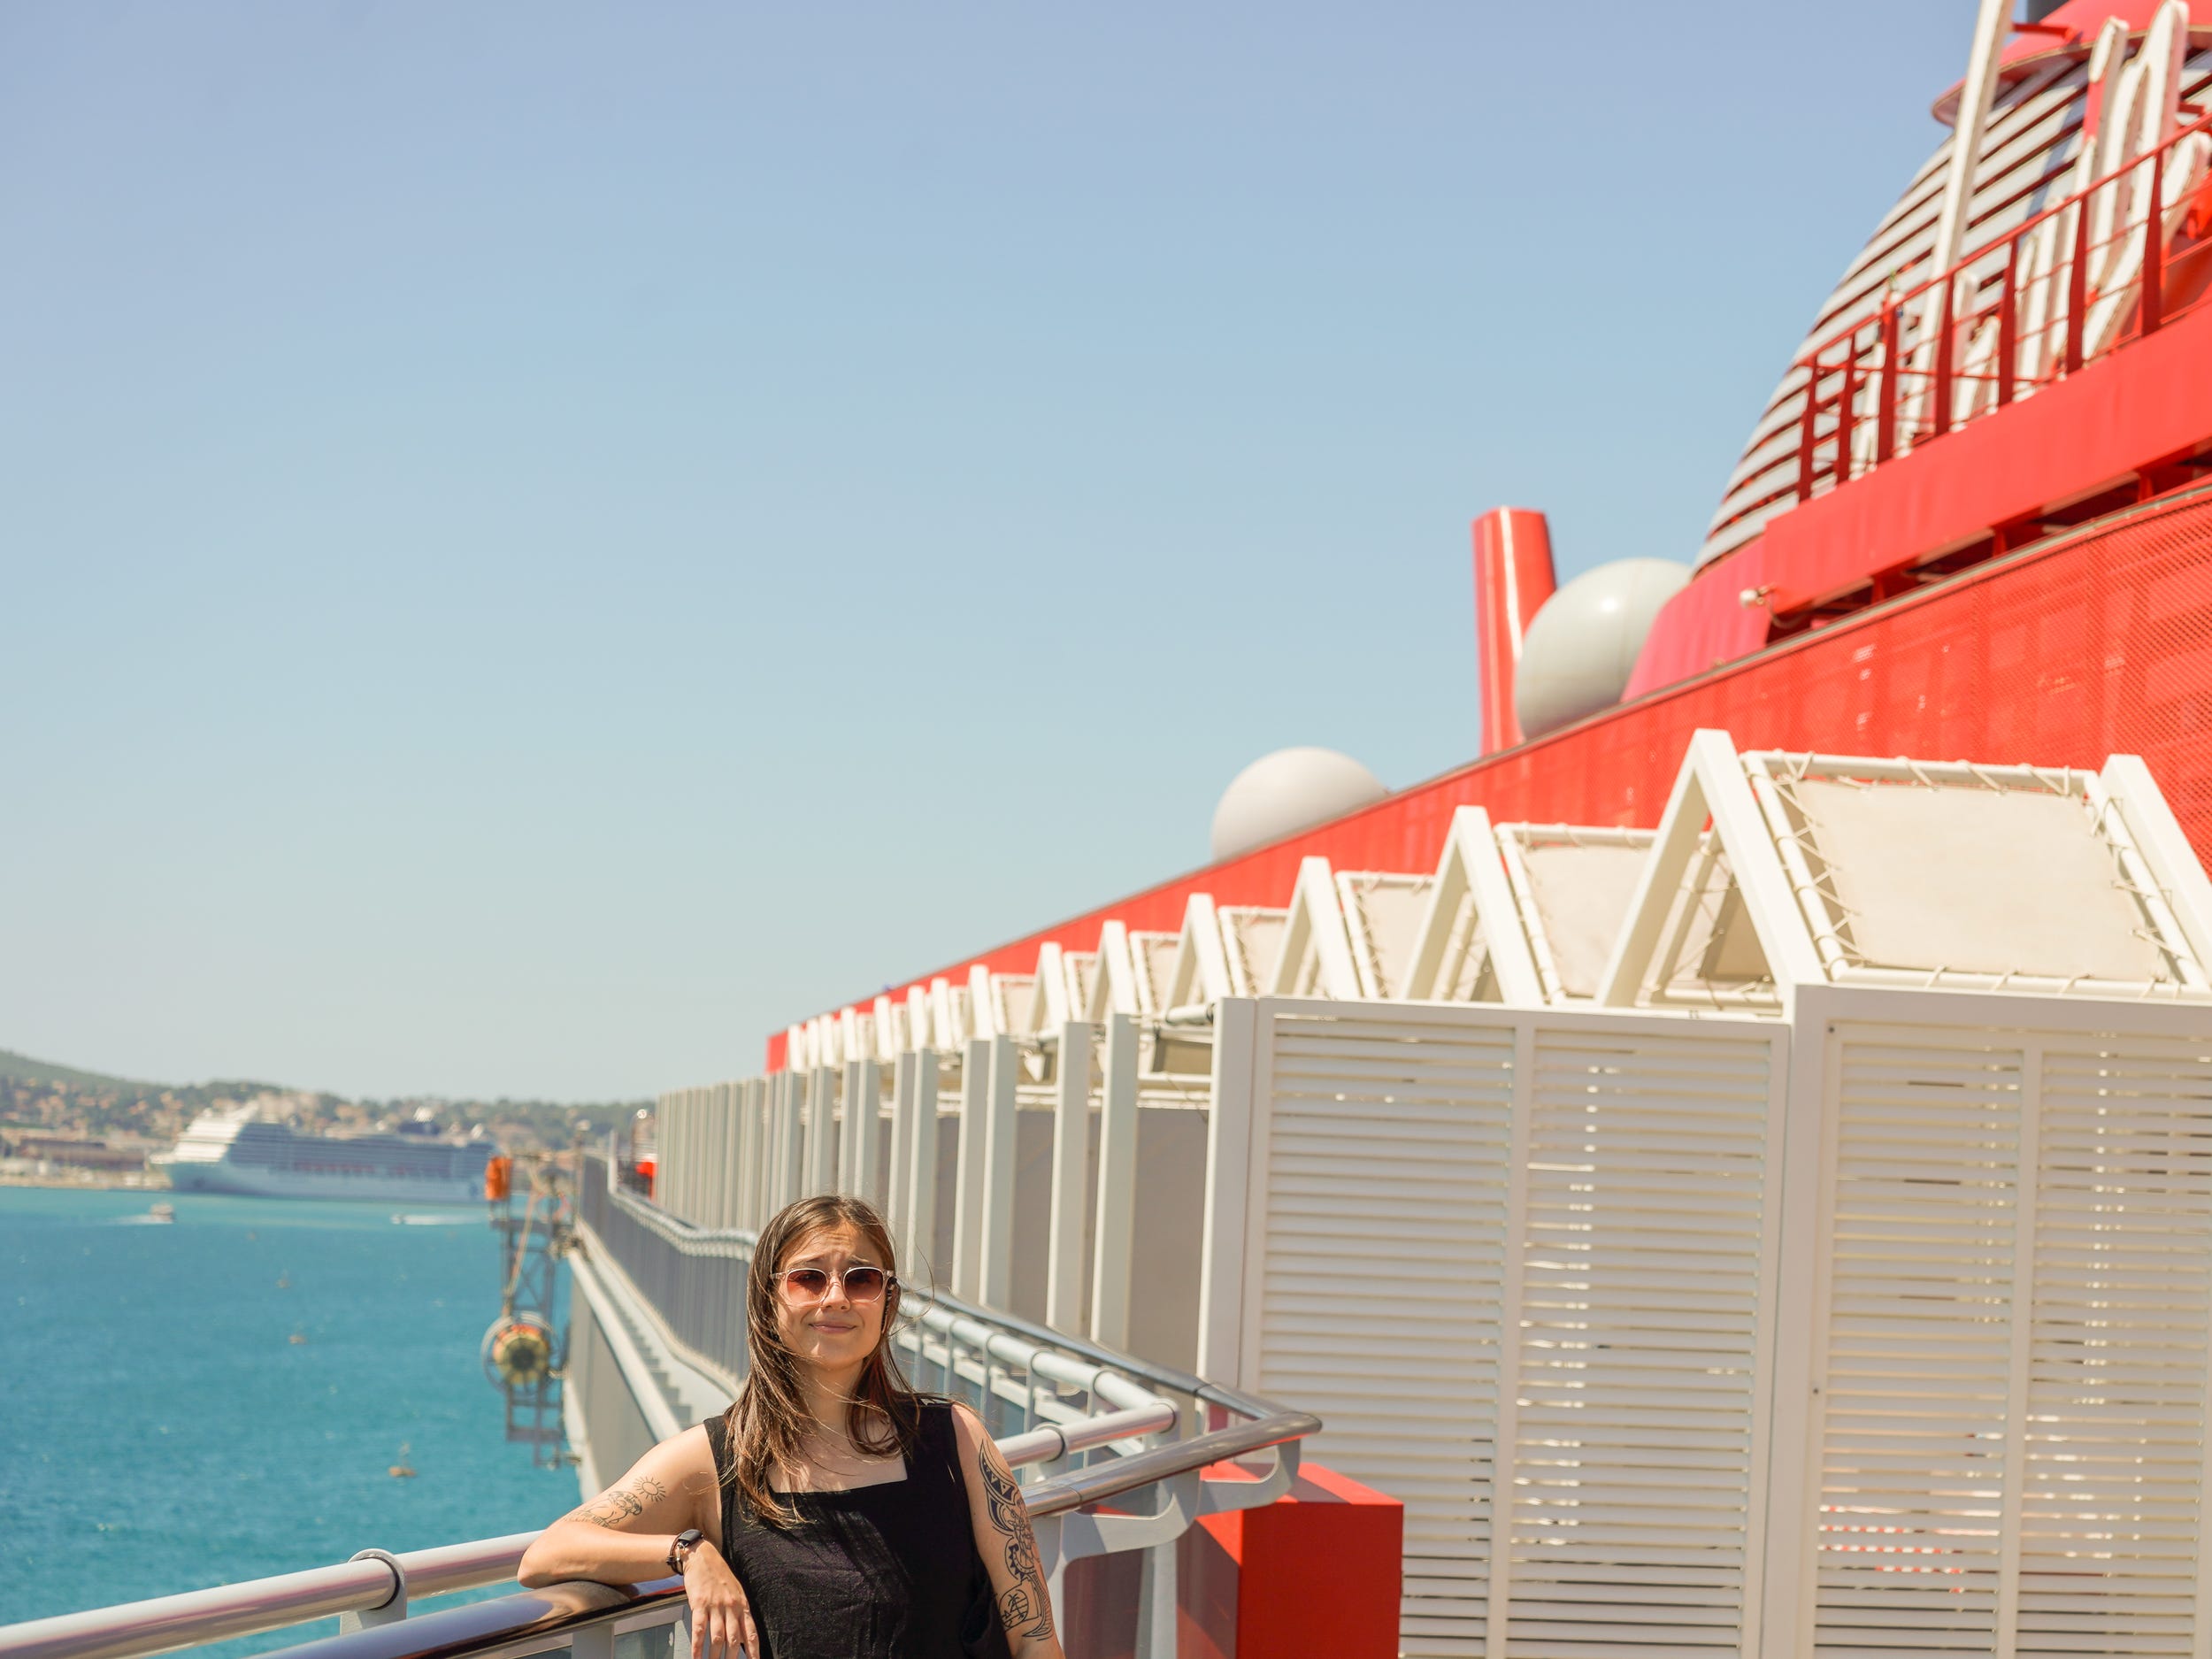 The author leans against a railing on a red cruise ship with water on the left on a clear day with blue skies.